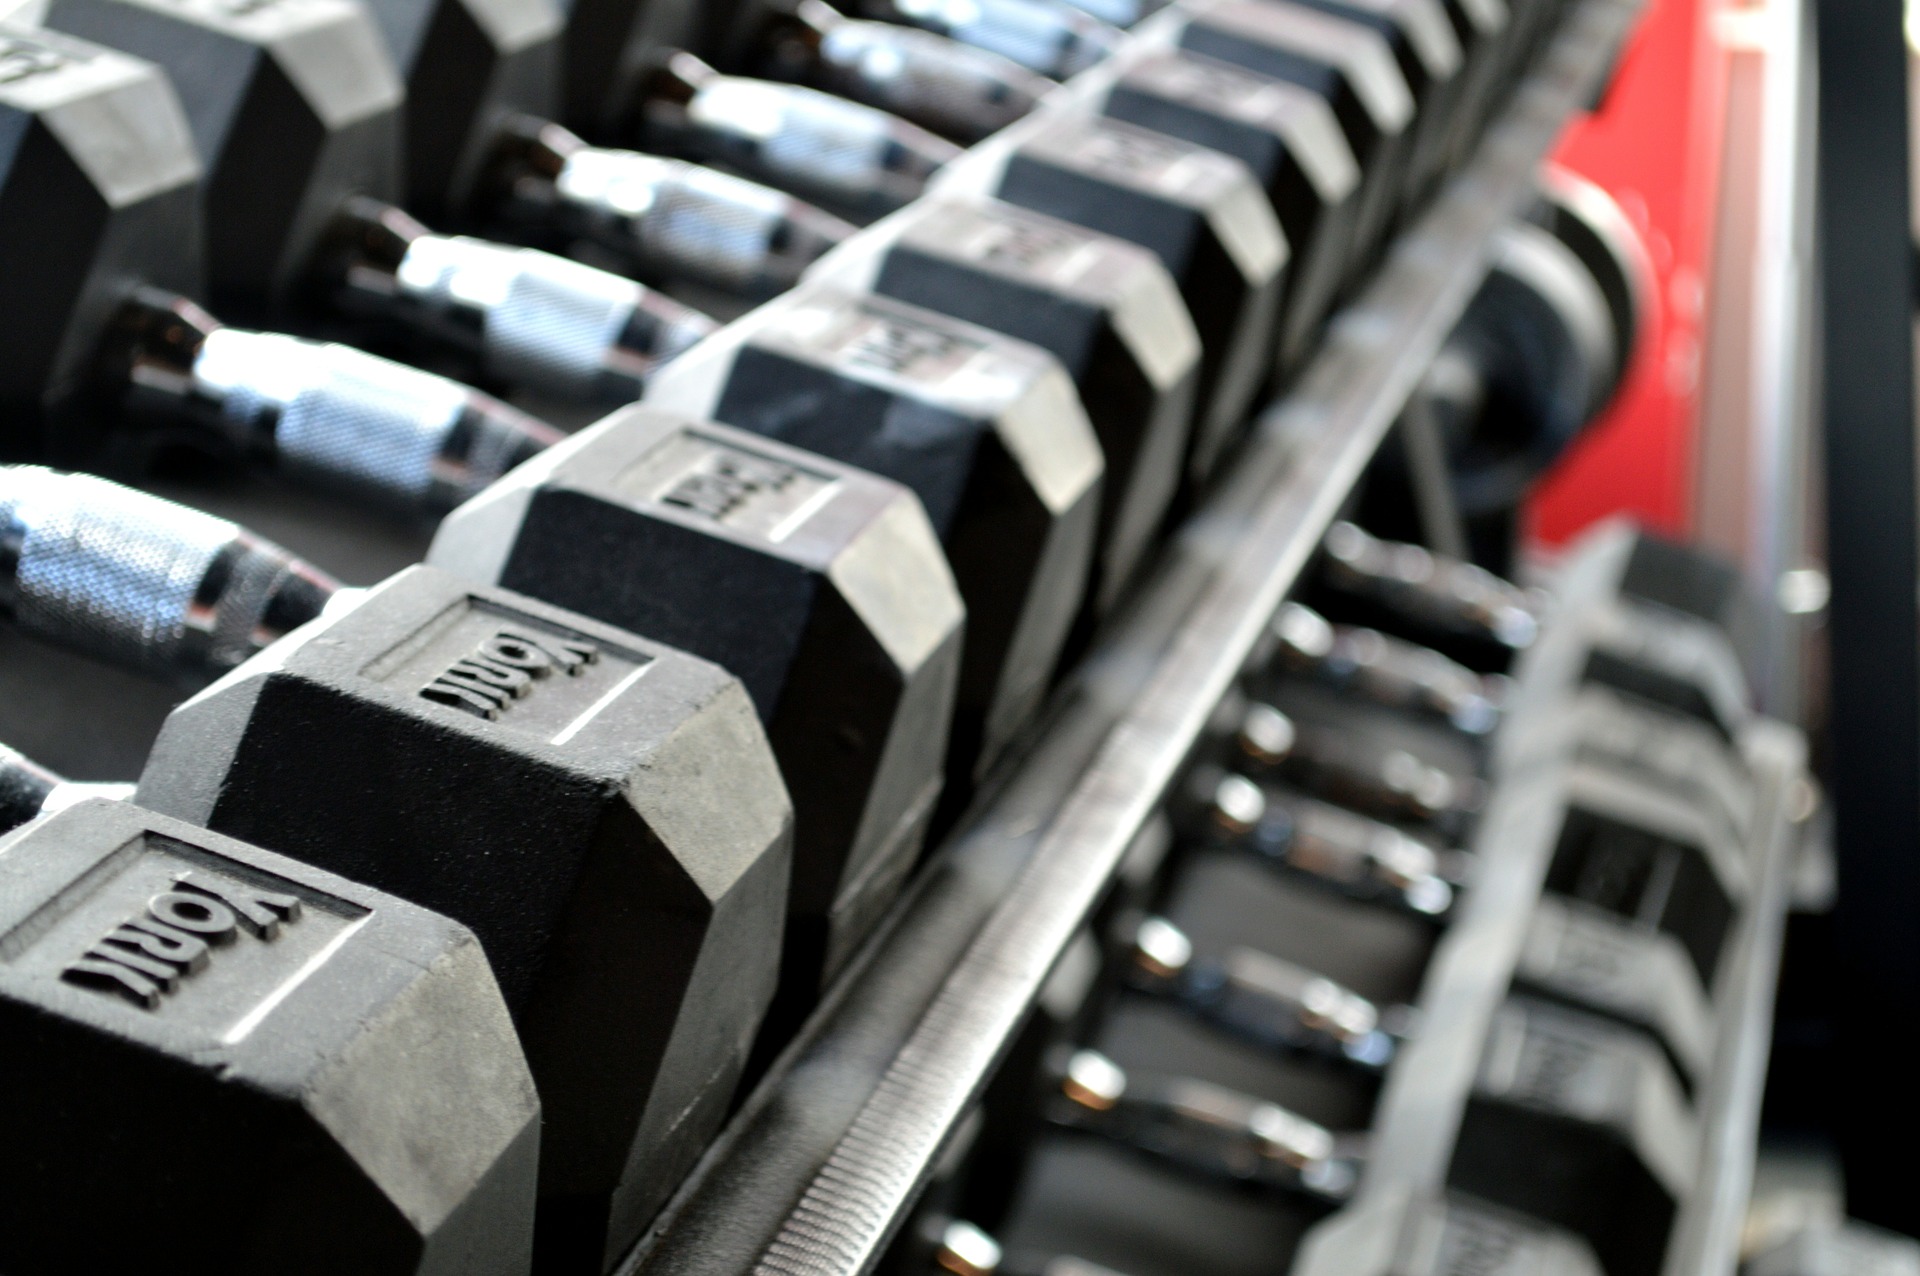 Weight Equipment at a Gym